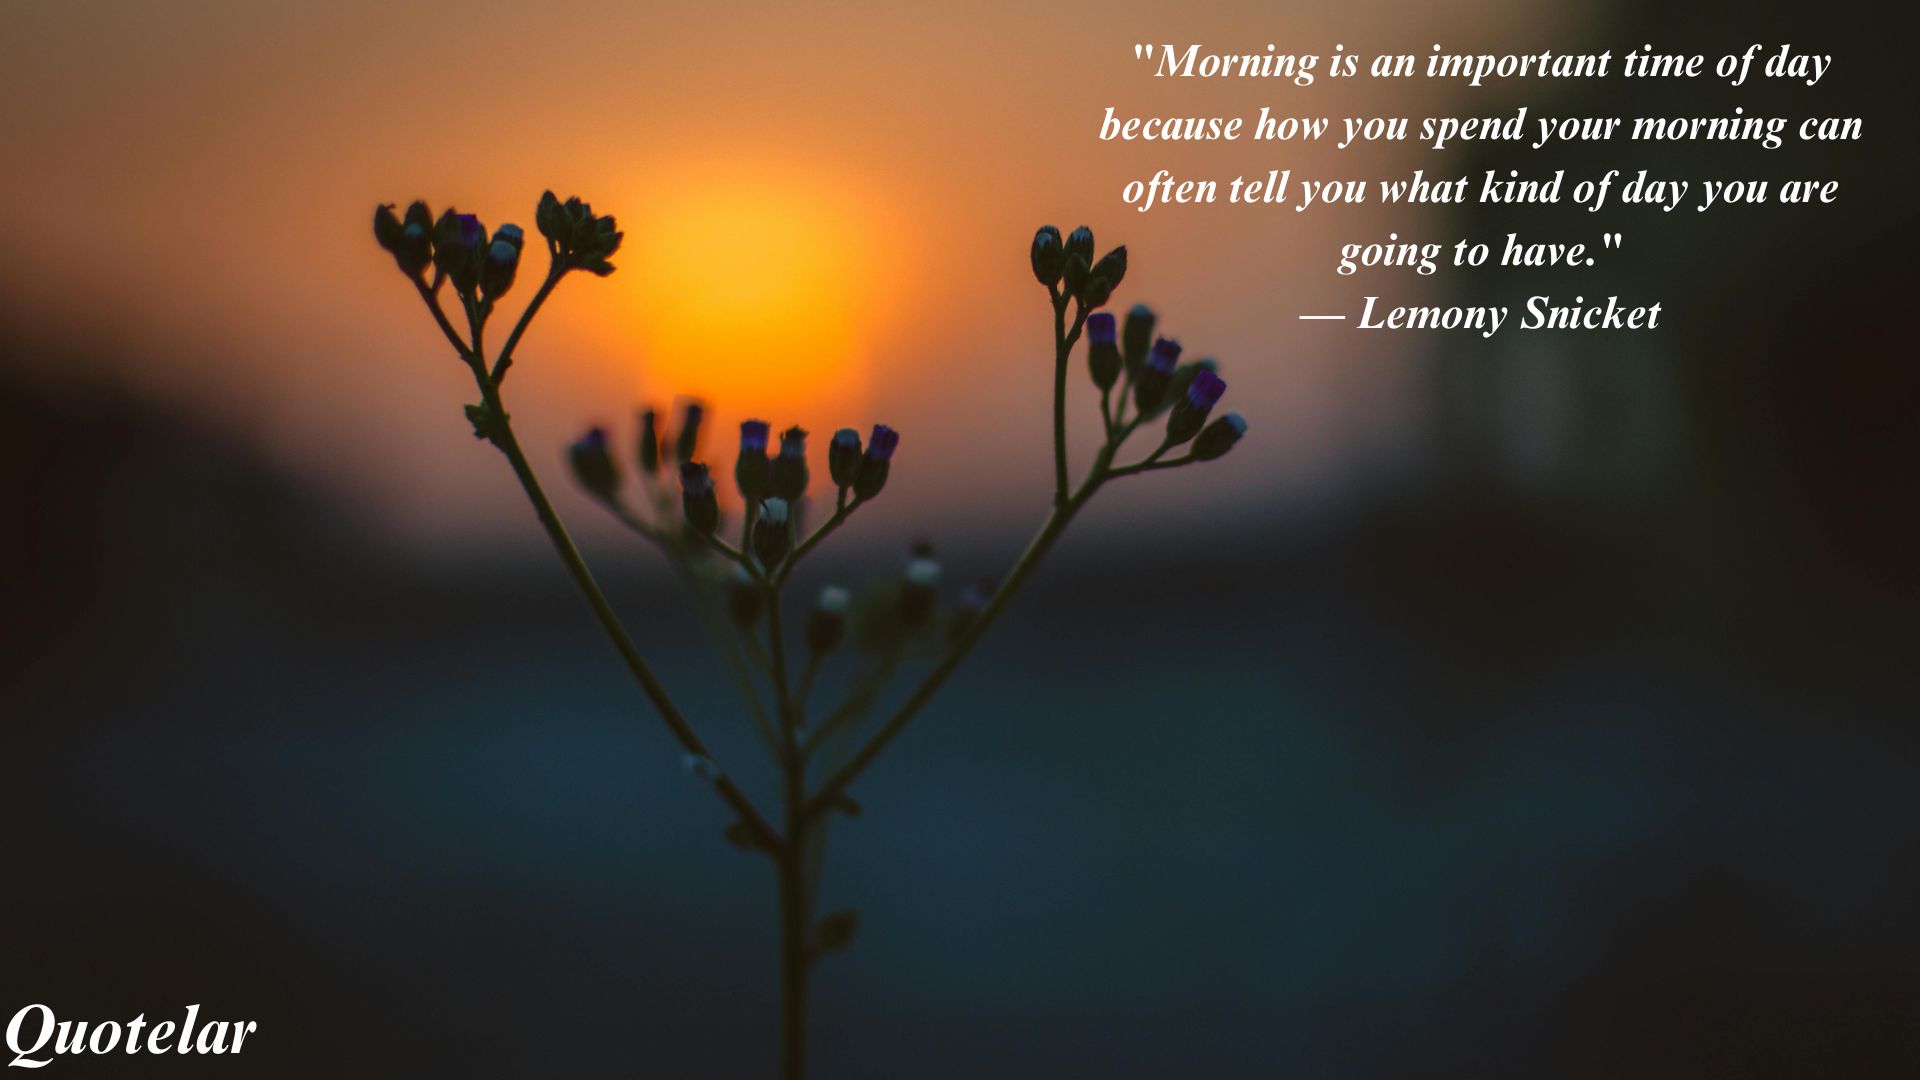 Top 10 Quotes of Good Morning